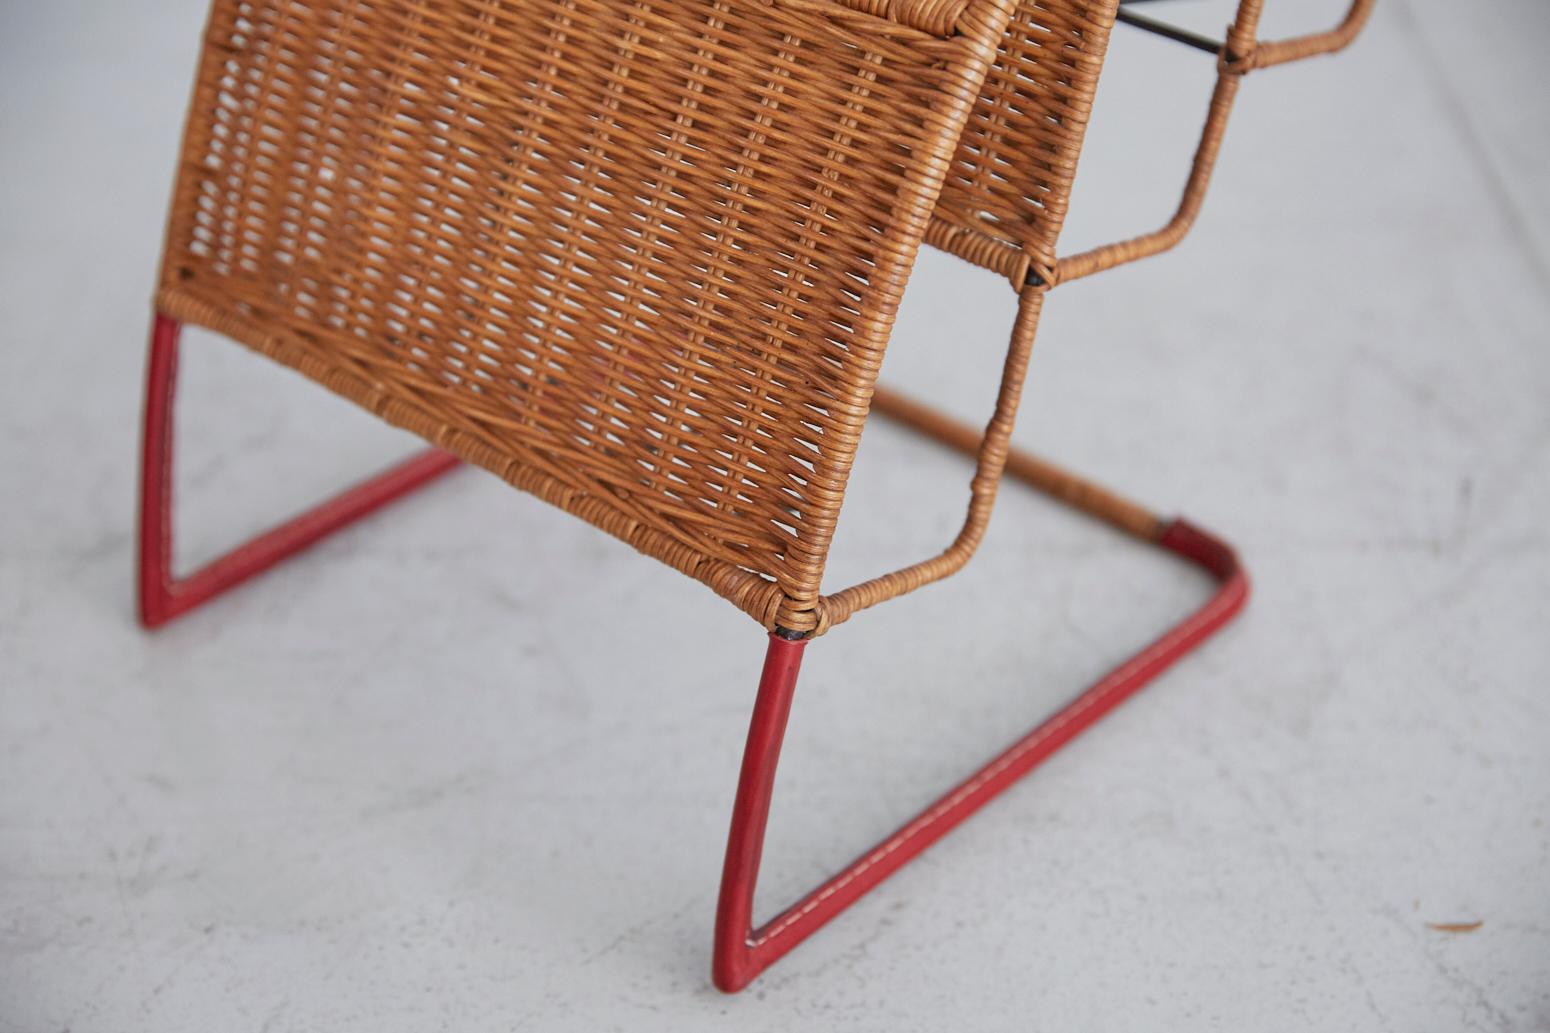 Wicker Magazine Rack Attributed to Jacques Adnet 1